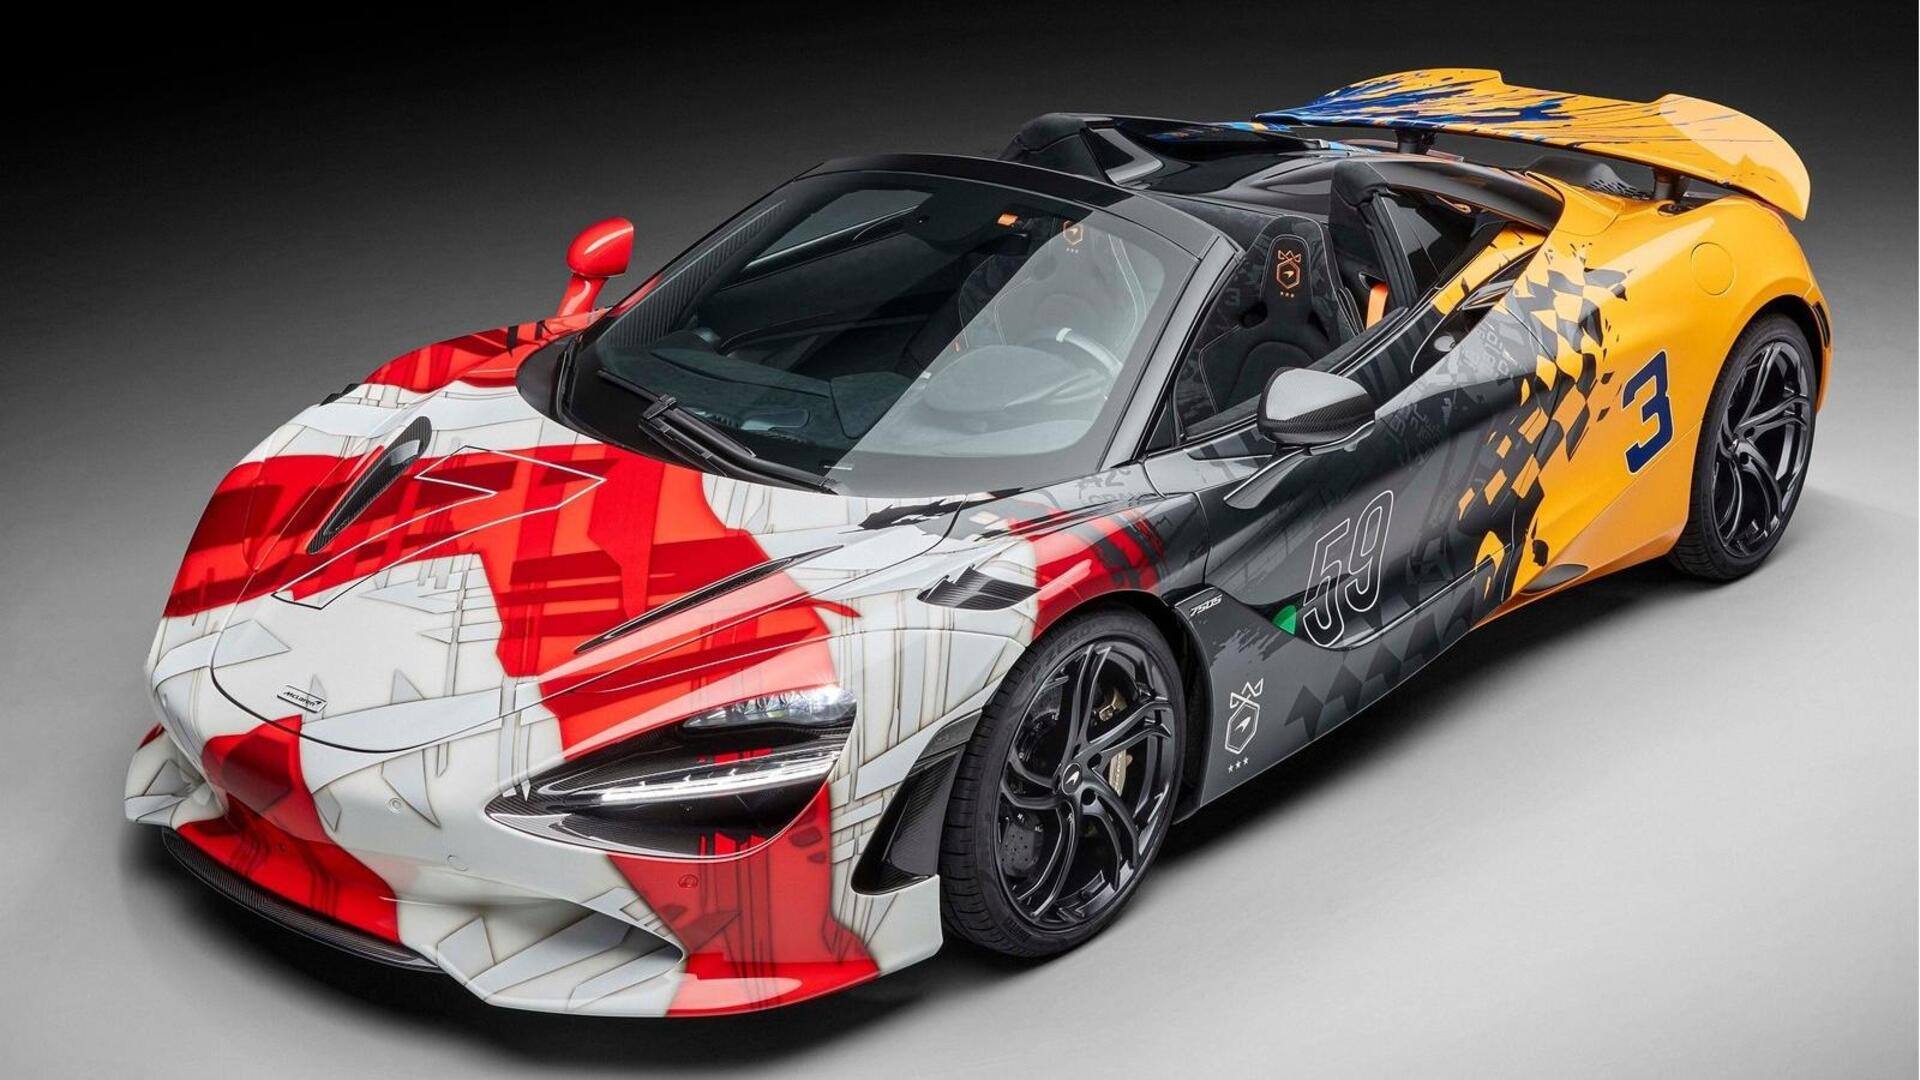 This colorful 750S by MSO celebrates McLaren's iconic race wins 